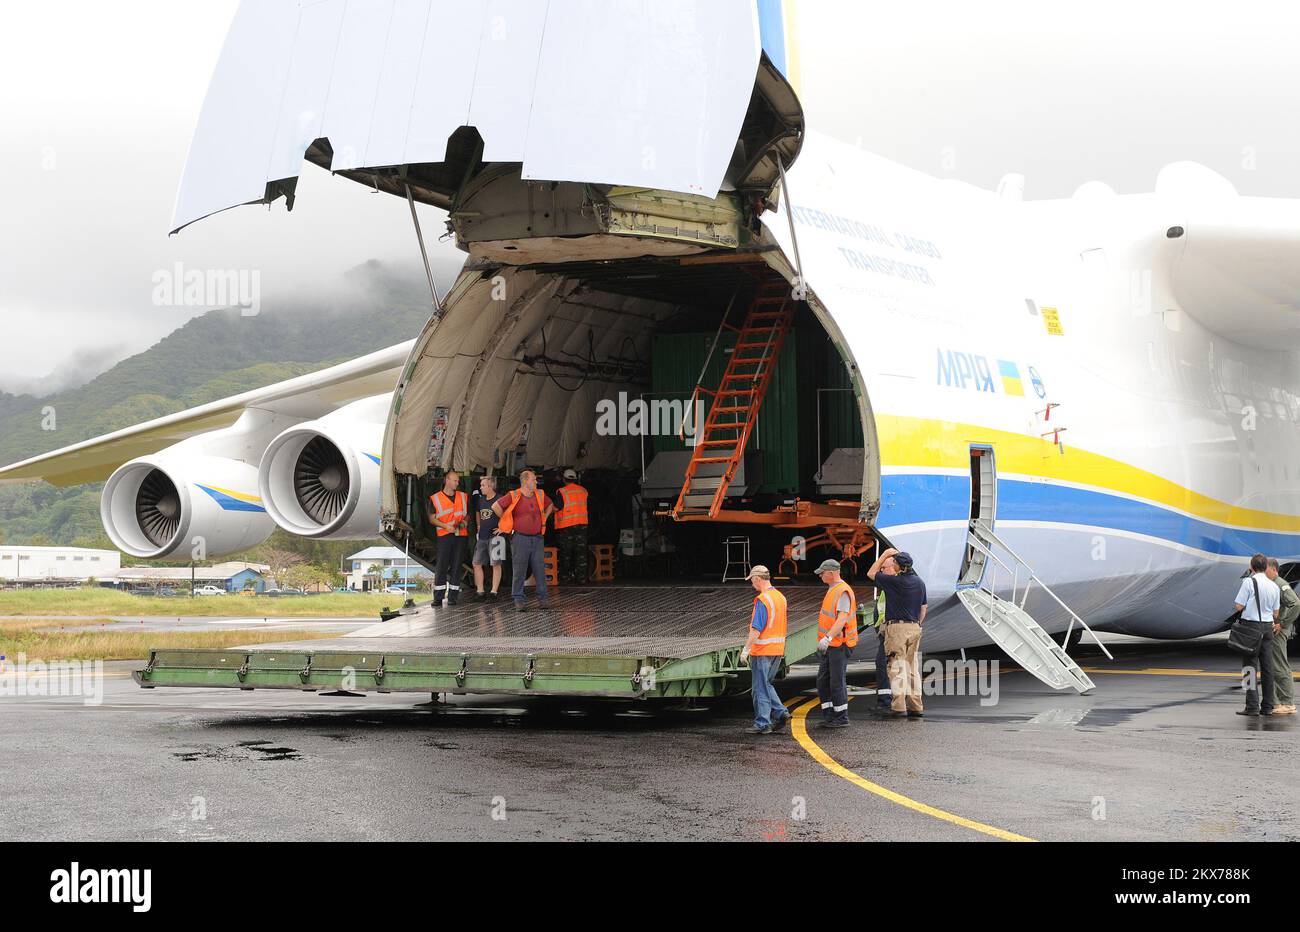 Antonov Cargo Plane Unloads Federal Emergency Mangement Agency C. American Samoa Earthquake, Tsunami, and Flooding. Photographs Relating to Disasters and Emergency Management Programs, Activities, and Officials Stock Photo